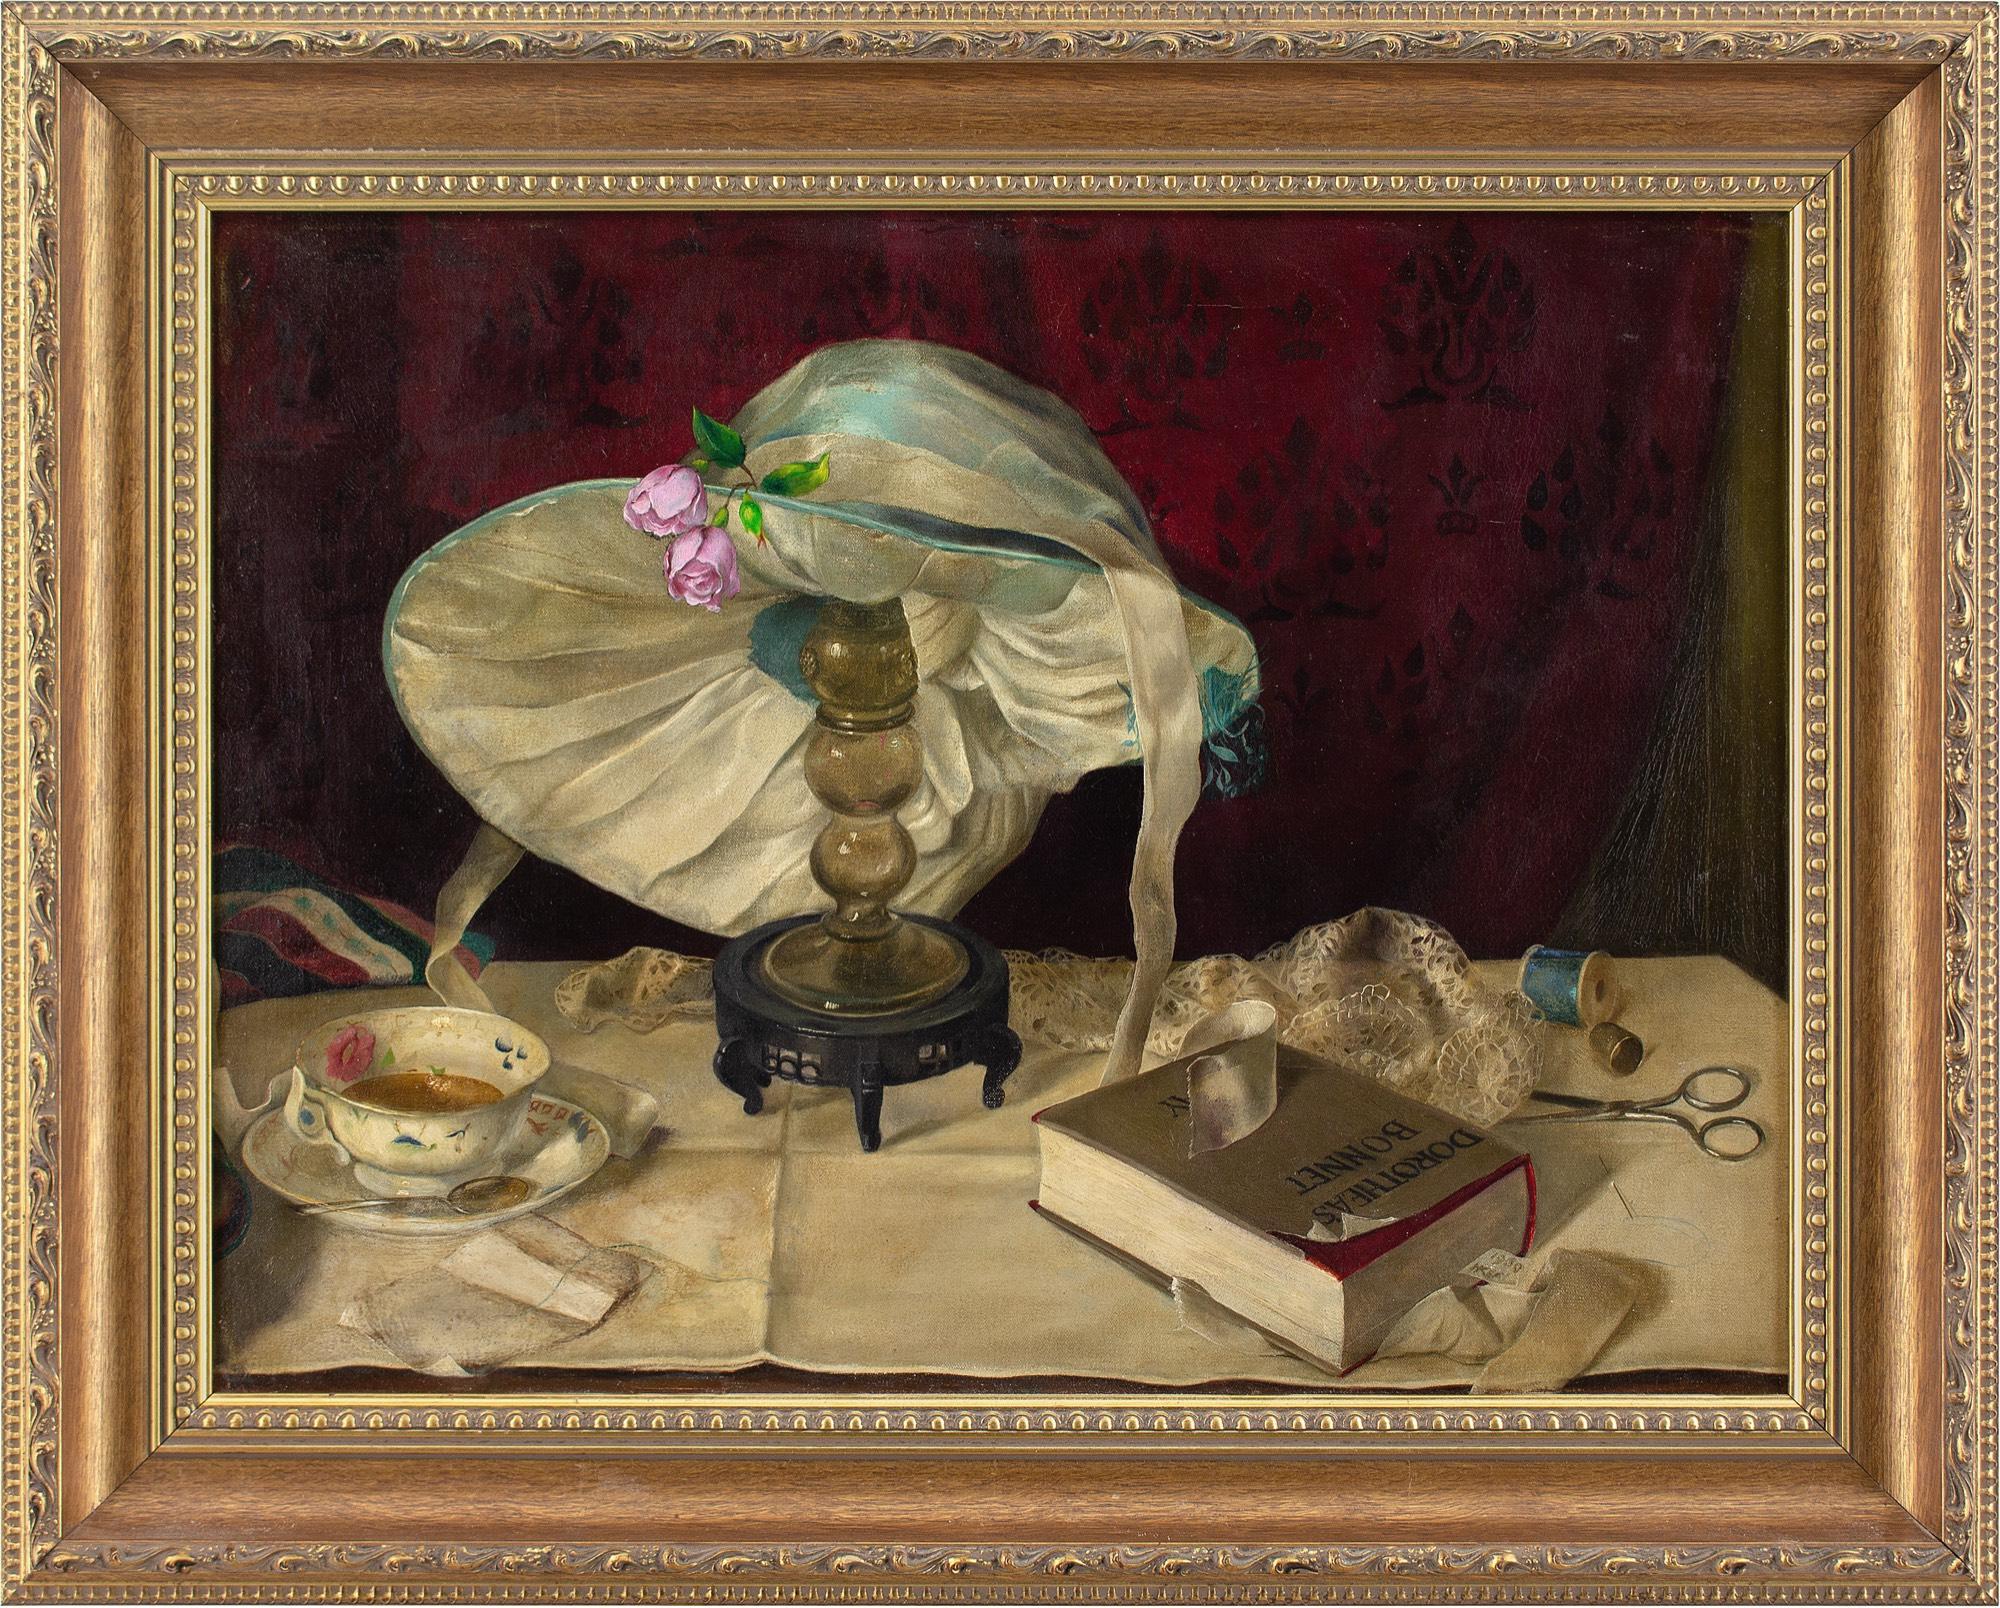 This mid-20th-century oil painting by British artist Harry Keay (1914-1994) depicts a still life with a book, bonnet, teacup and sewing paraphernalia. It was shown at the Royal Society of British Artists.

In a quiet corner of the home, a